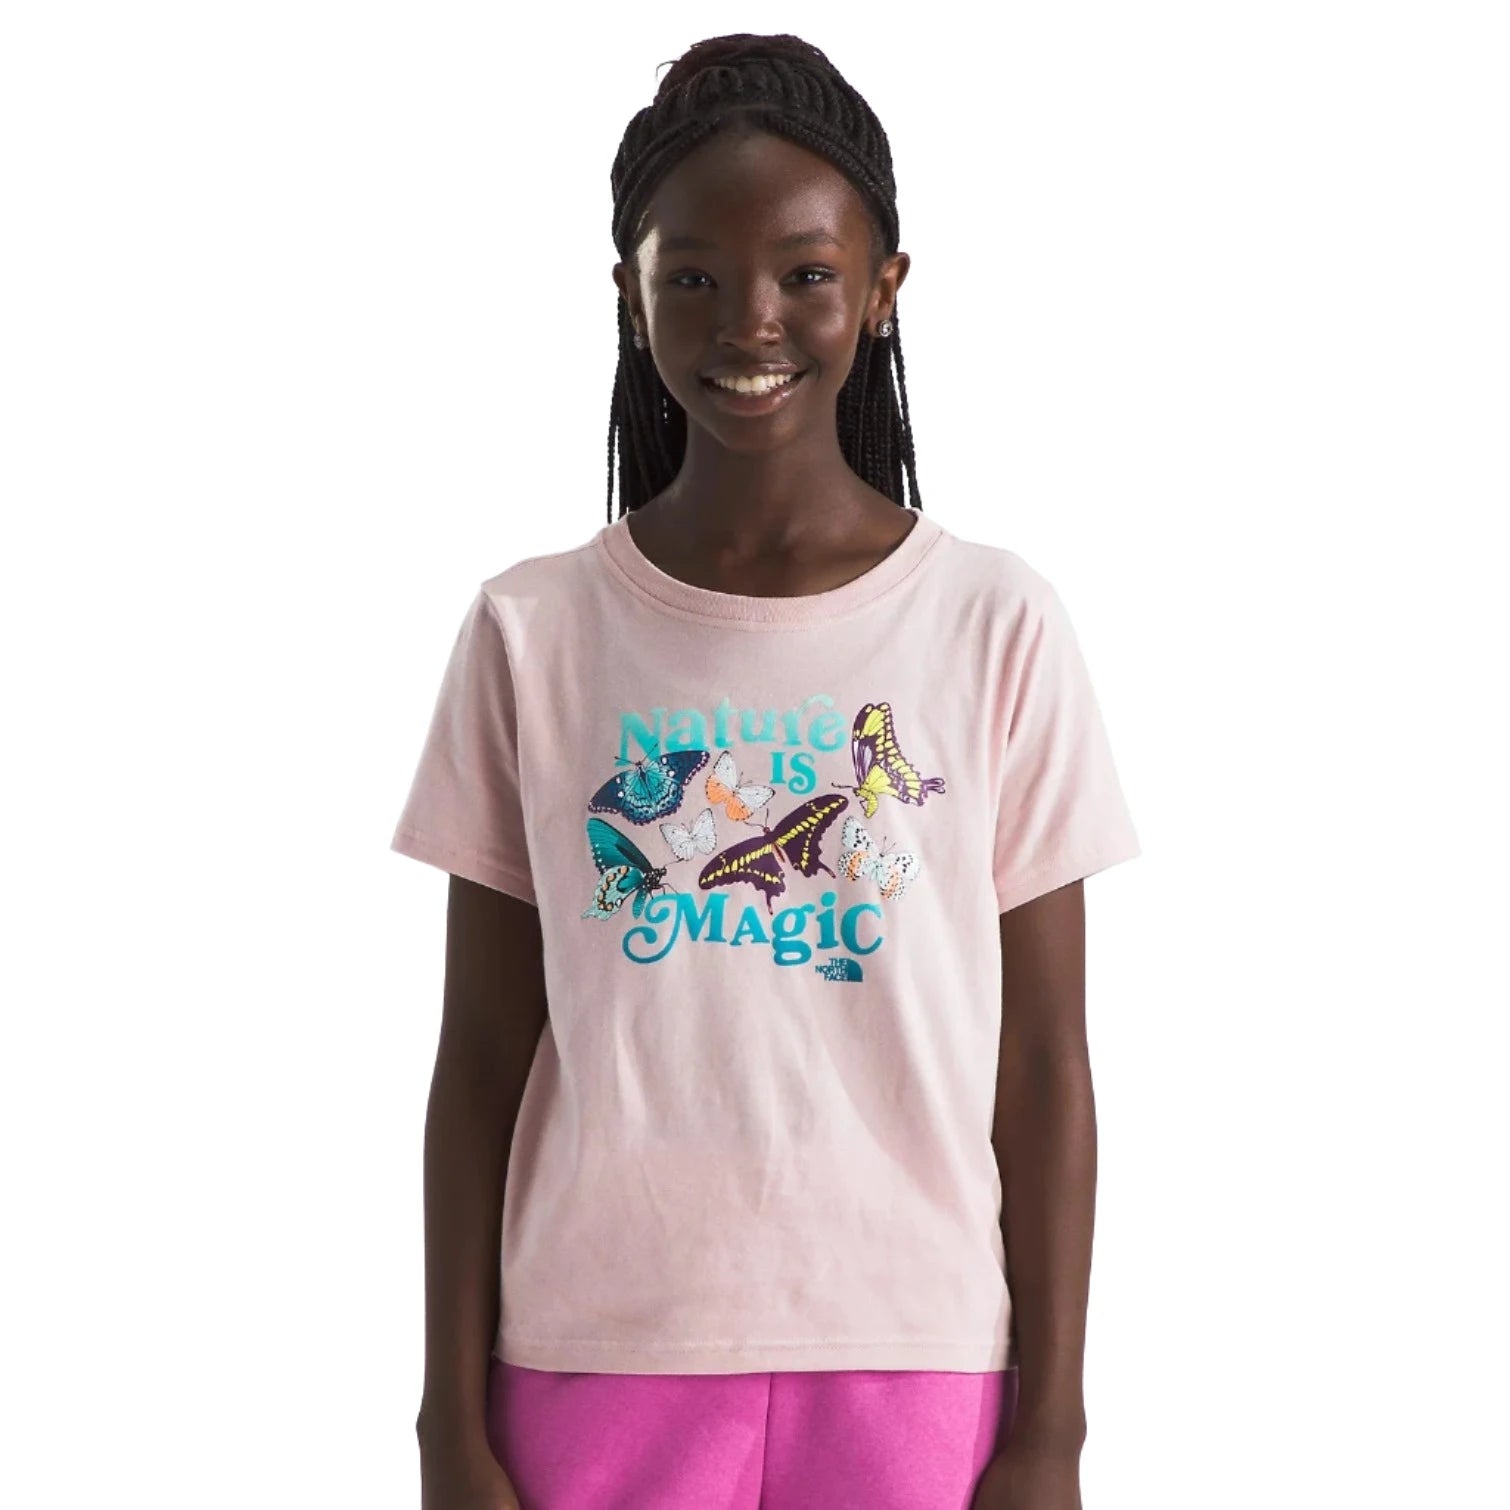 The North Face K's Short-Sleeve Graphic Tee, Pink Moss, front view on model